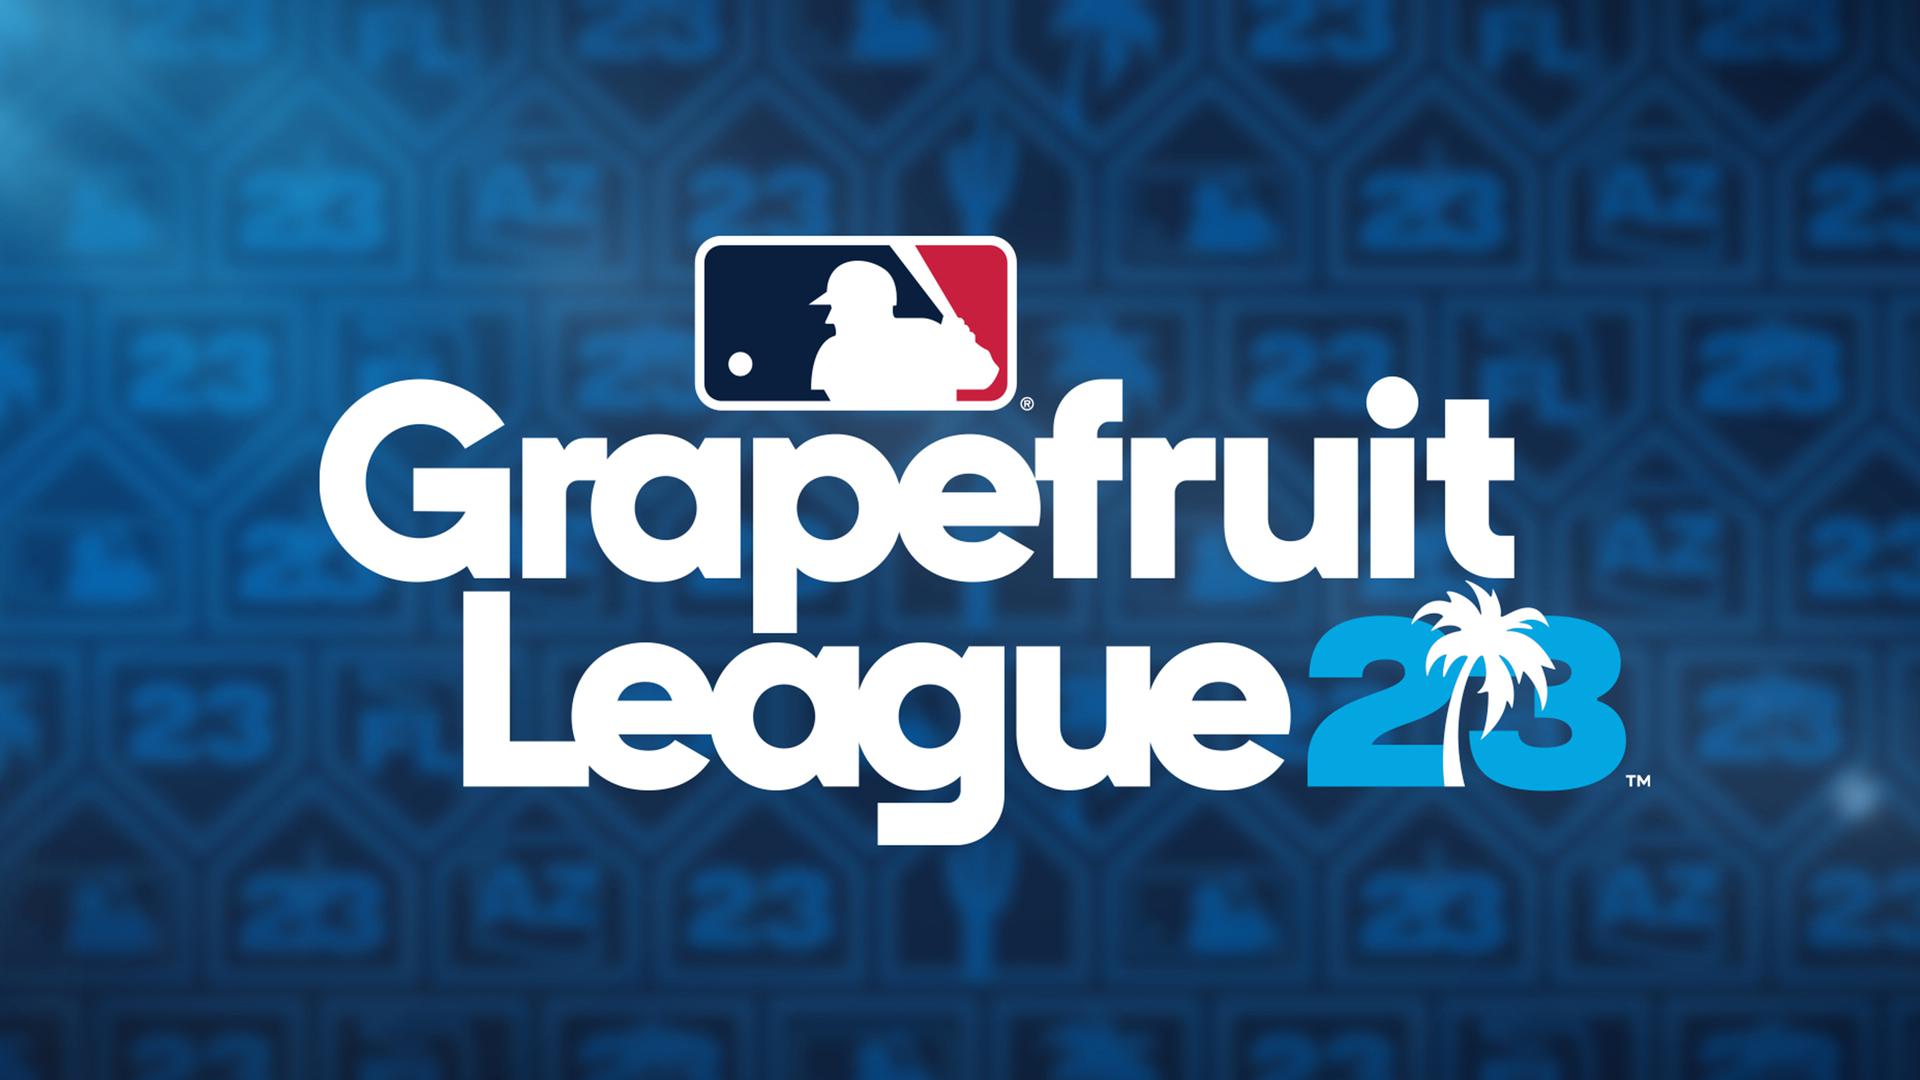 The MLB logo over the words ''Grapefruit League 23'' on a blue background